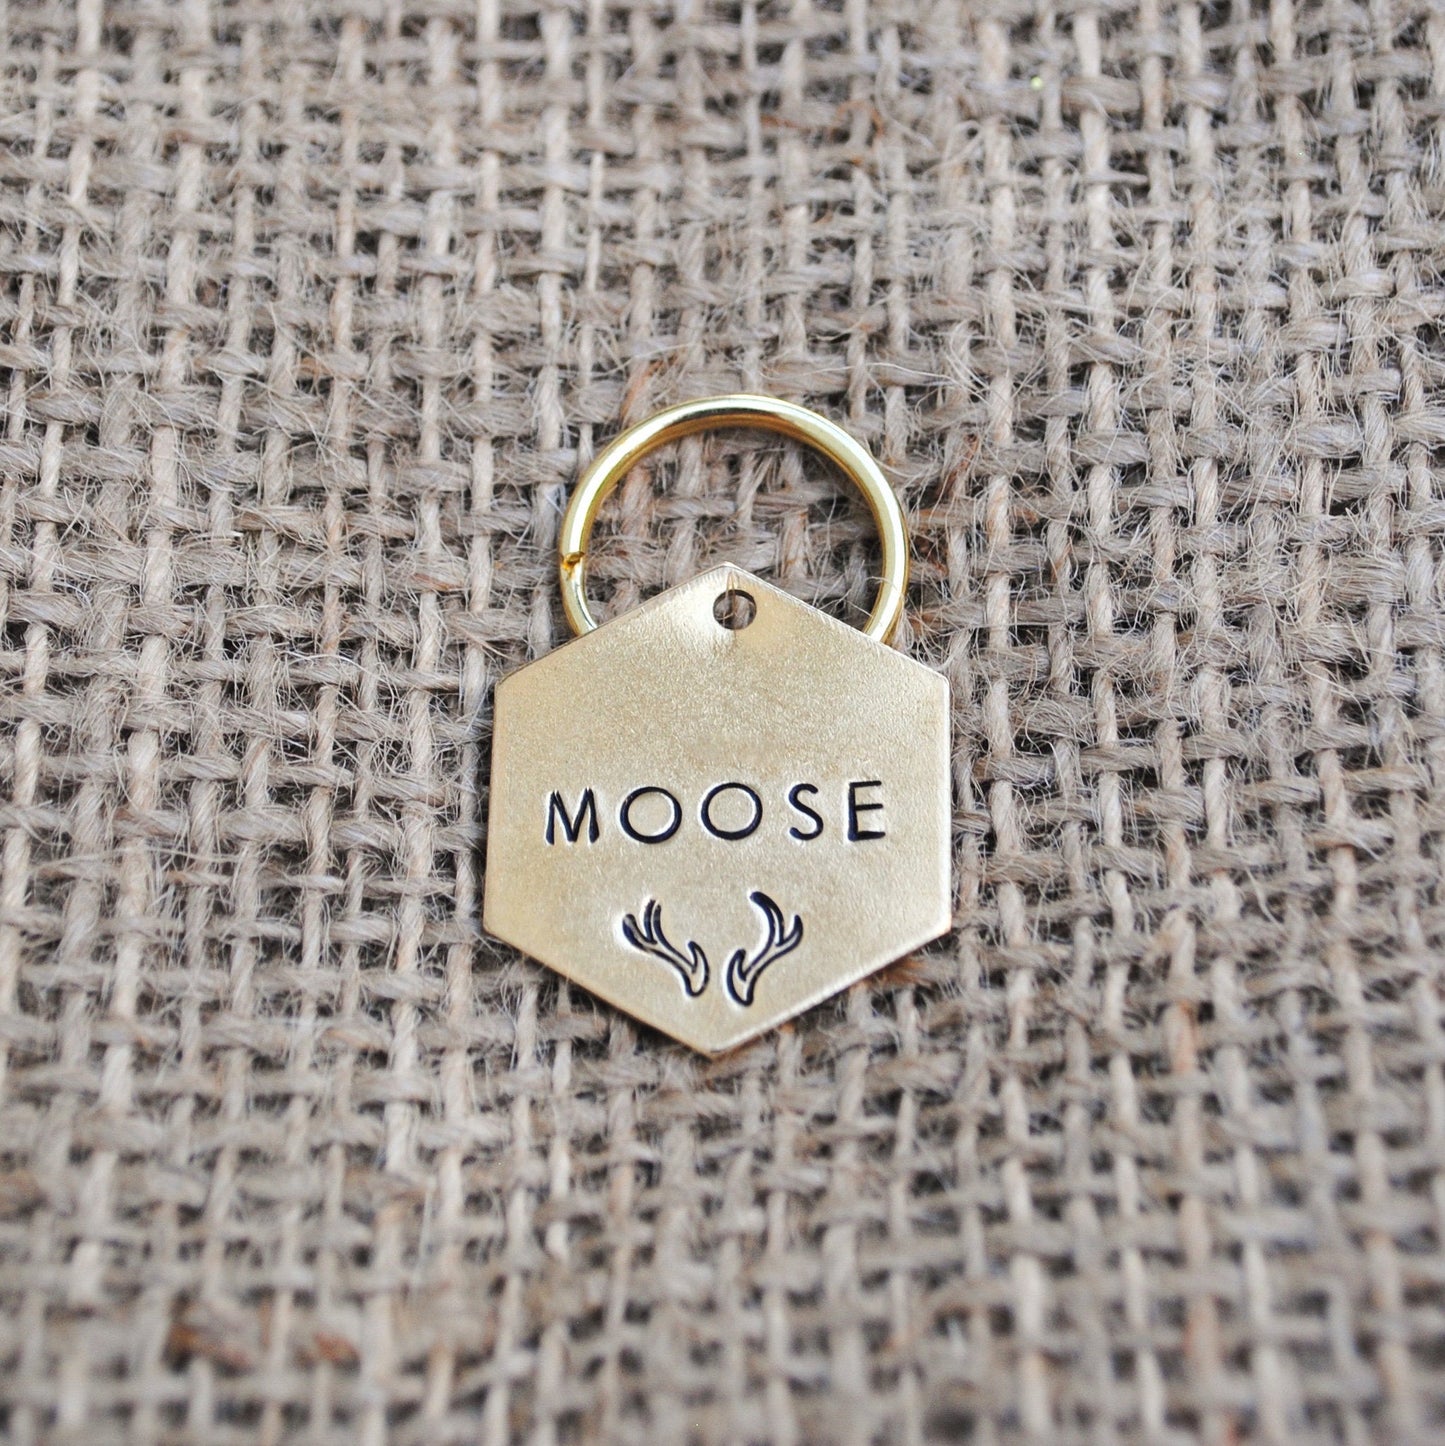 Personalized Dog Tag - Antlers Hand Stamped Dog Tag - Cat Tag - Dog ID Tag - Dog Collar Tag - Custom Dog Tag - Pet ID Tag - Metal Pet Tag - Pet Name Tag - Deer Tag - Moose Dog Tag - Antlers Dog Tag - Dog Gear - Dog Accessories - Pet Accessories